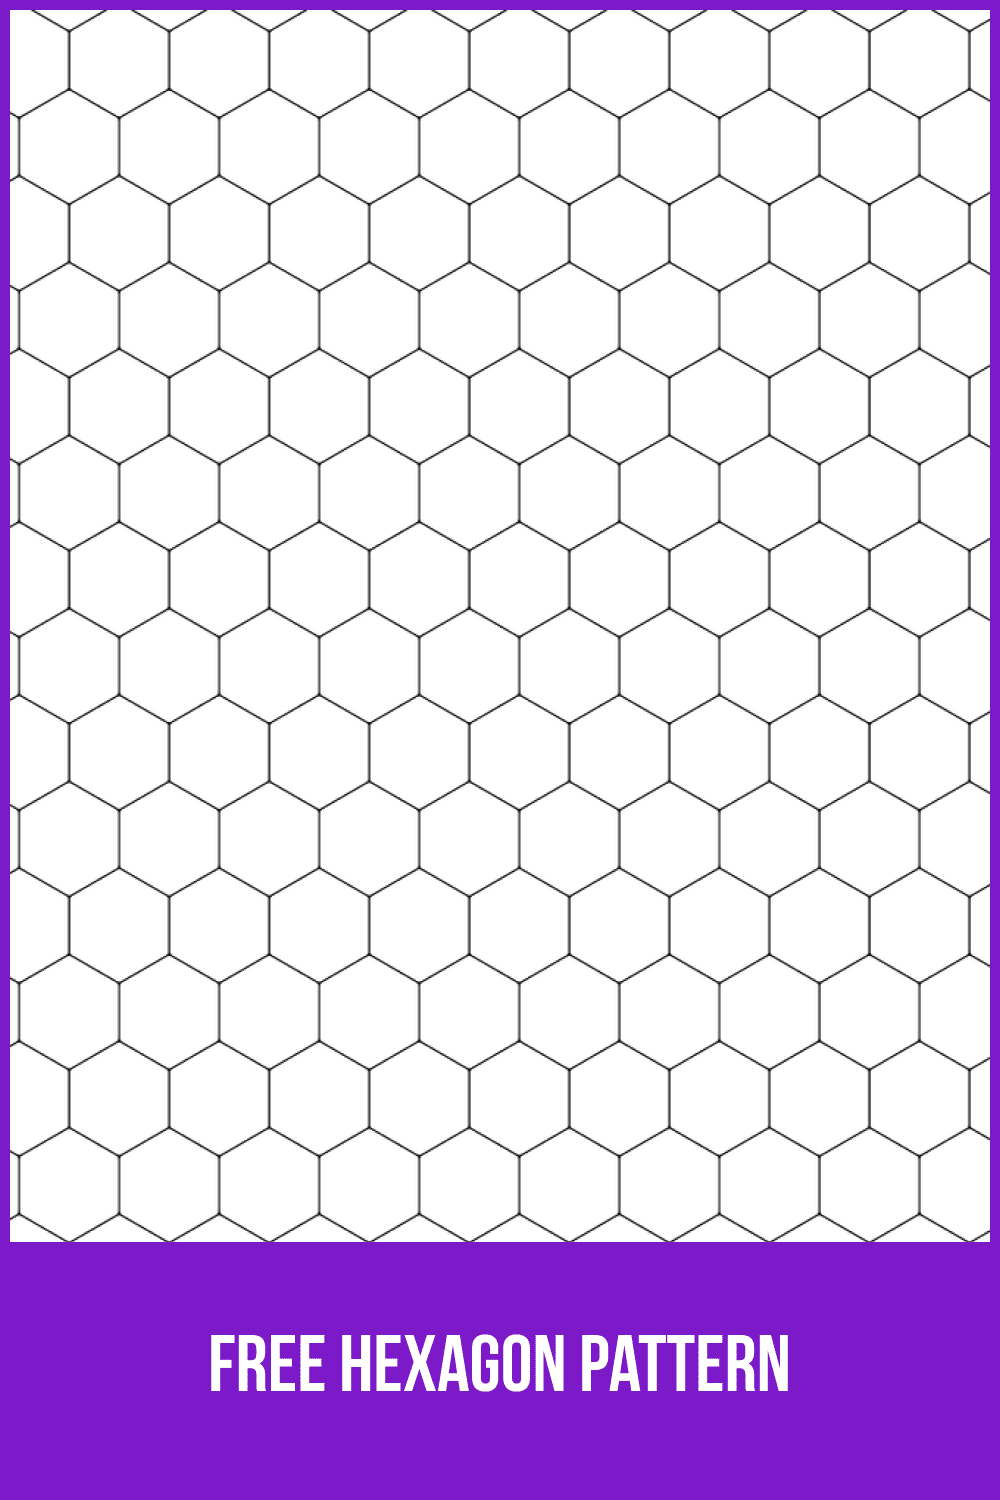 Classical hexagon in black and white colors.